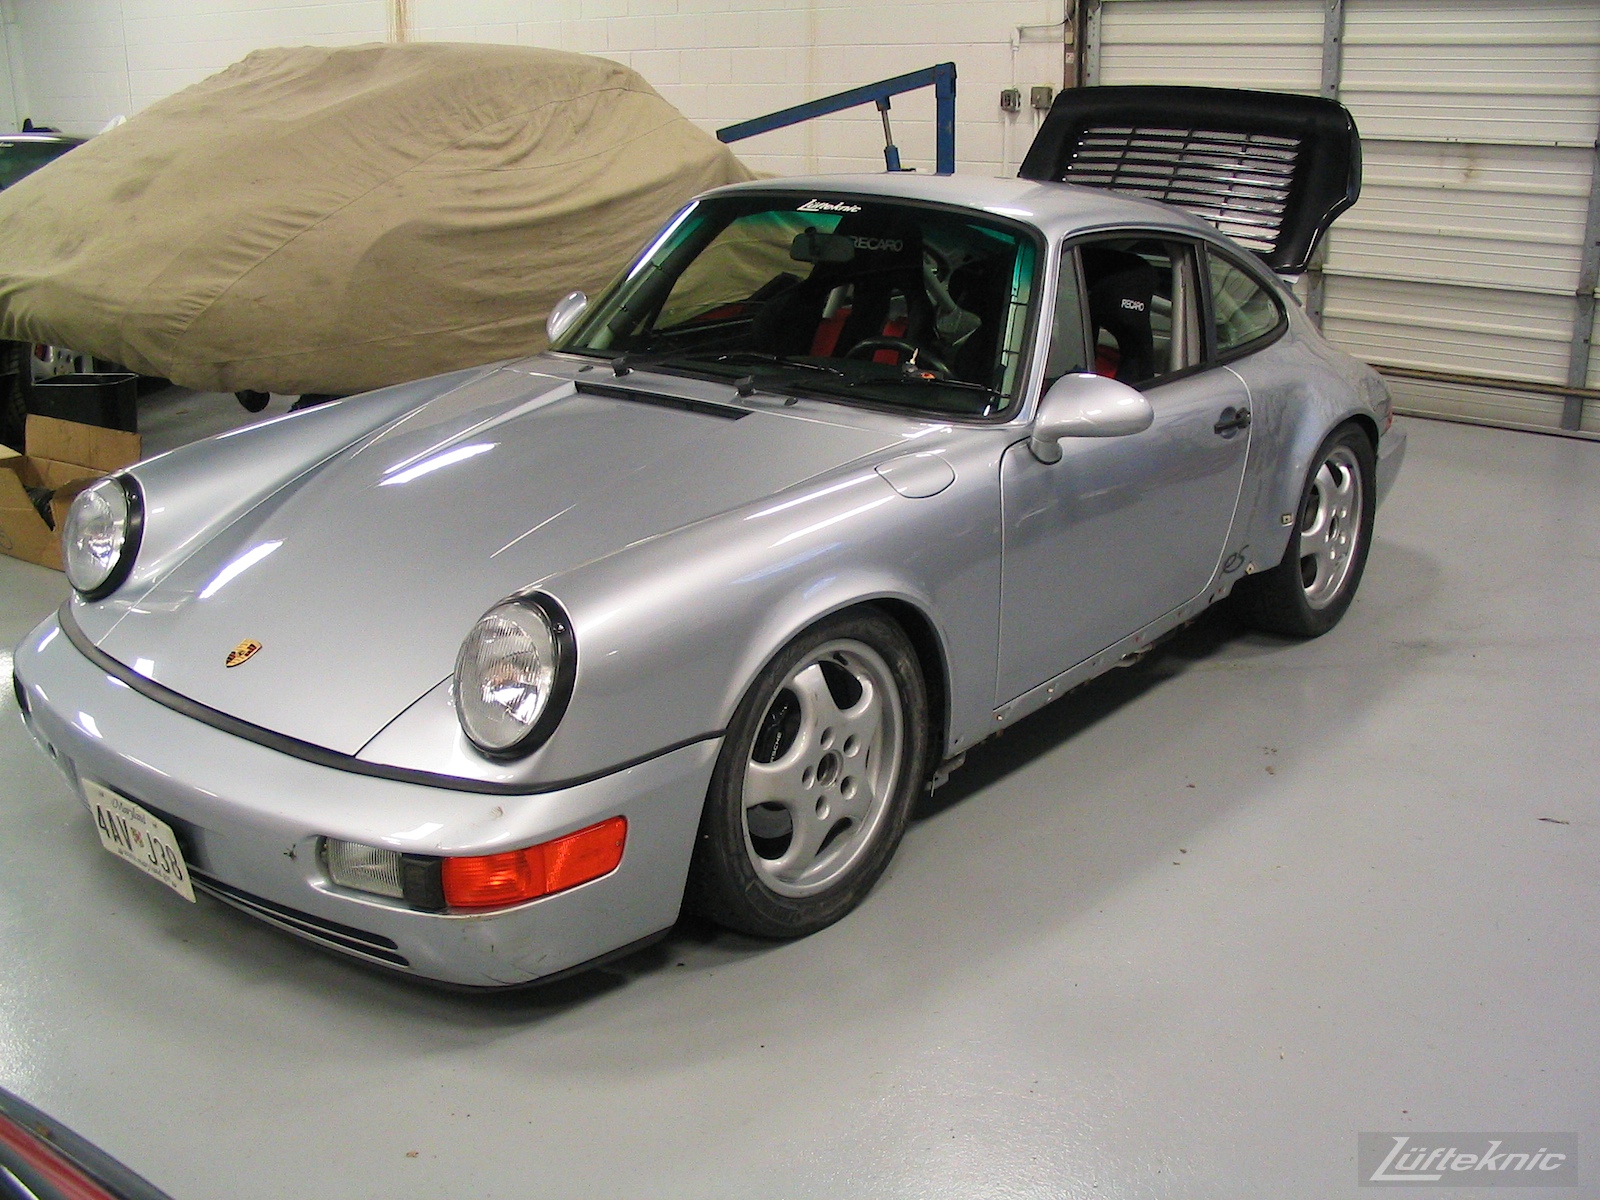 Roll cage, seats, harness installed and fresh paint shown on the 964 RS America.